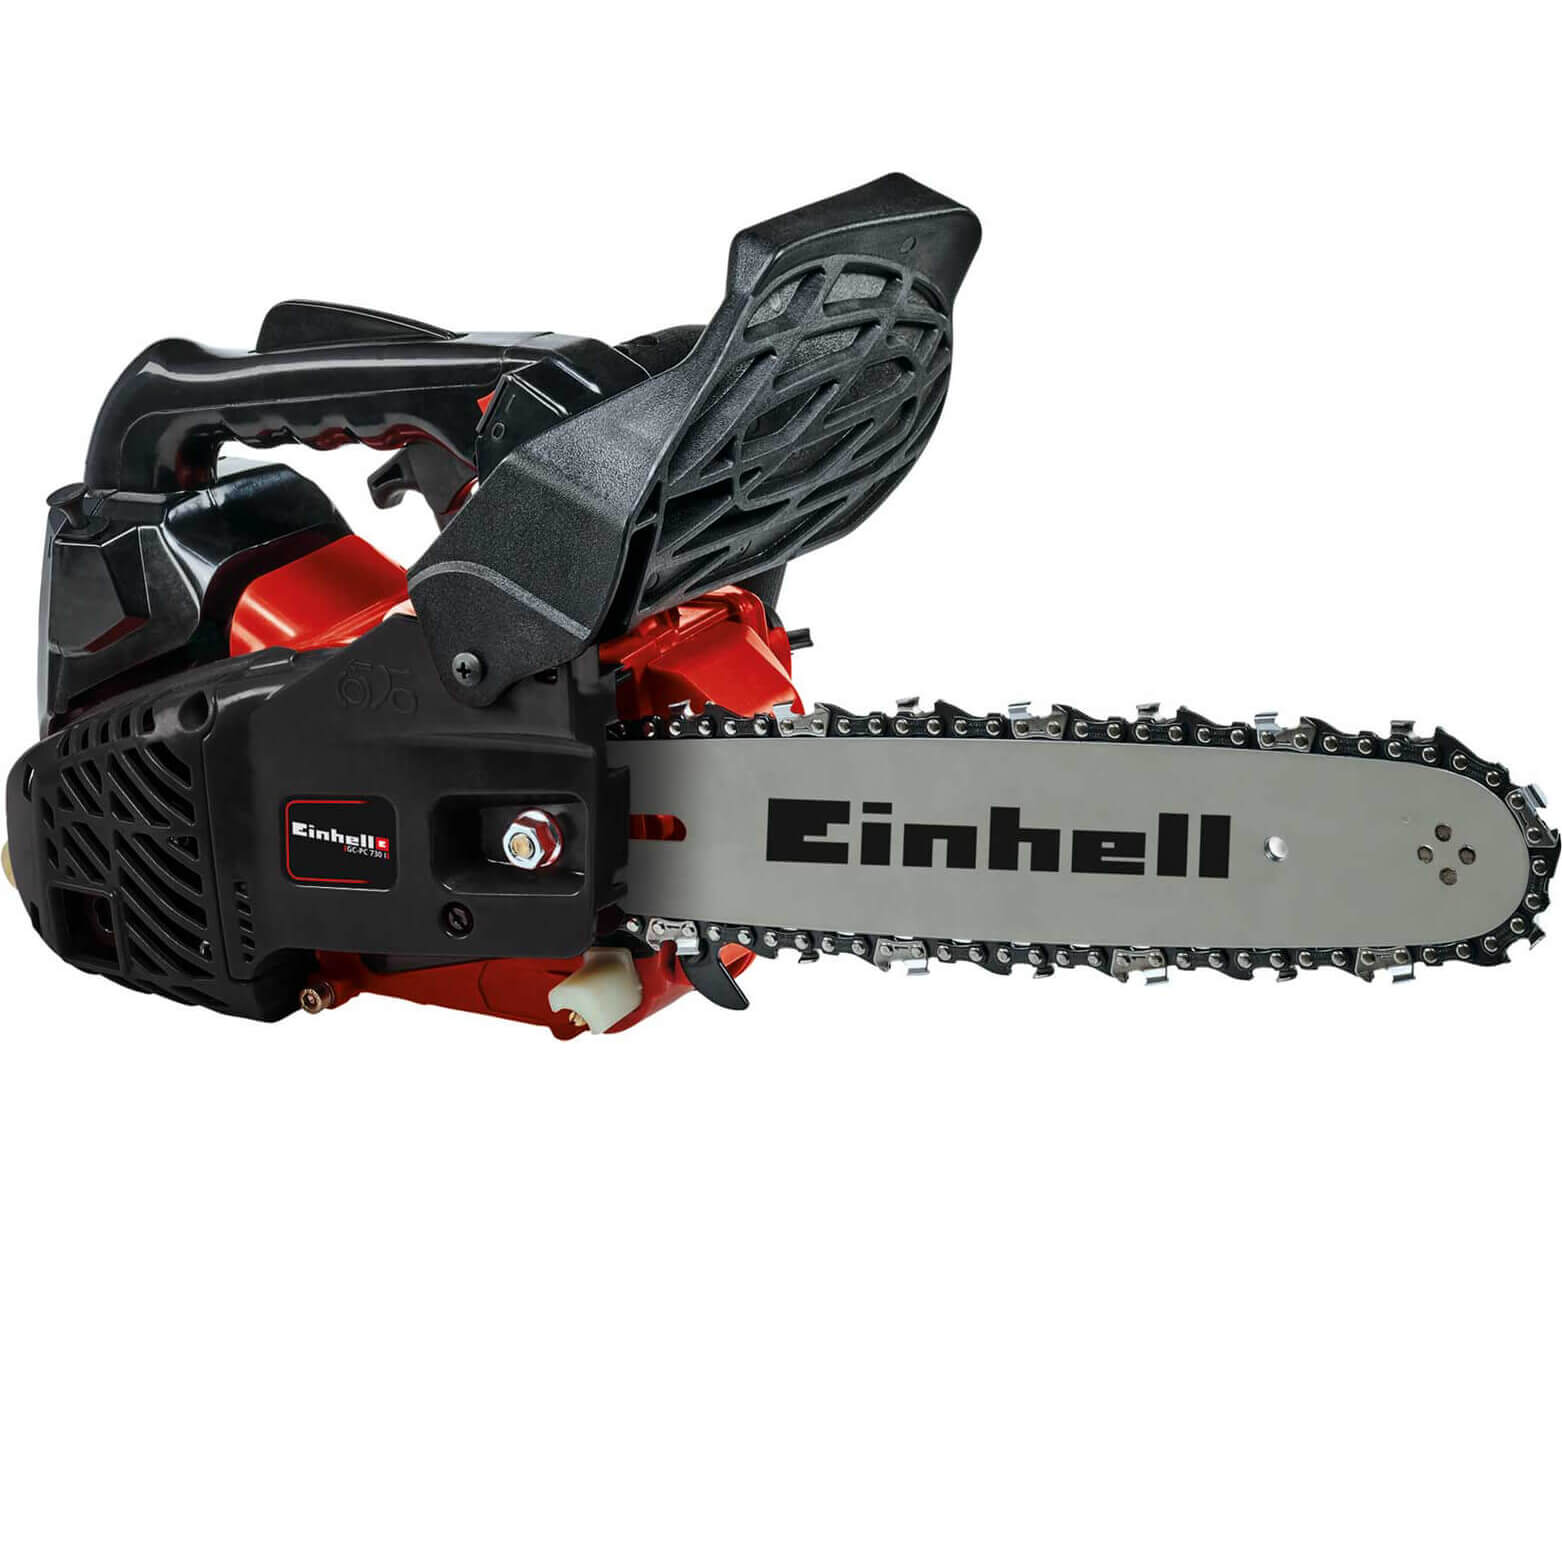 Photo of Einhell Gc-pc 730 I Petrol Chainsaw 305mm